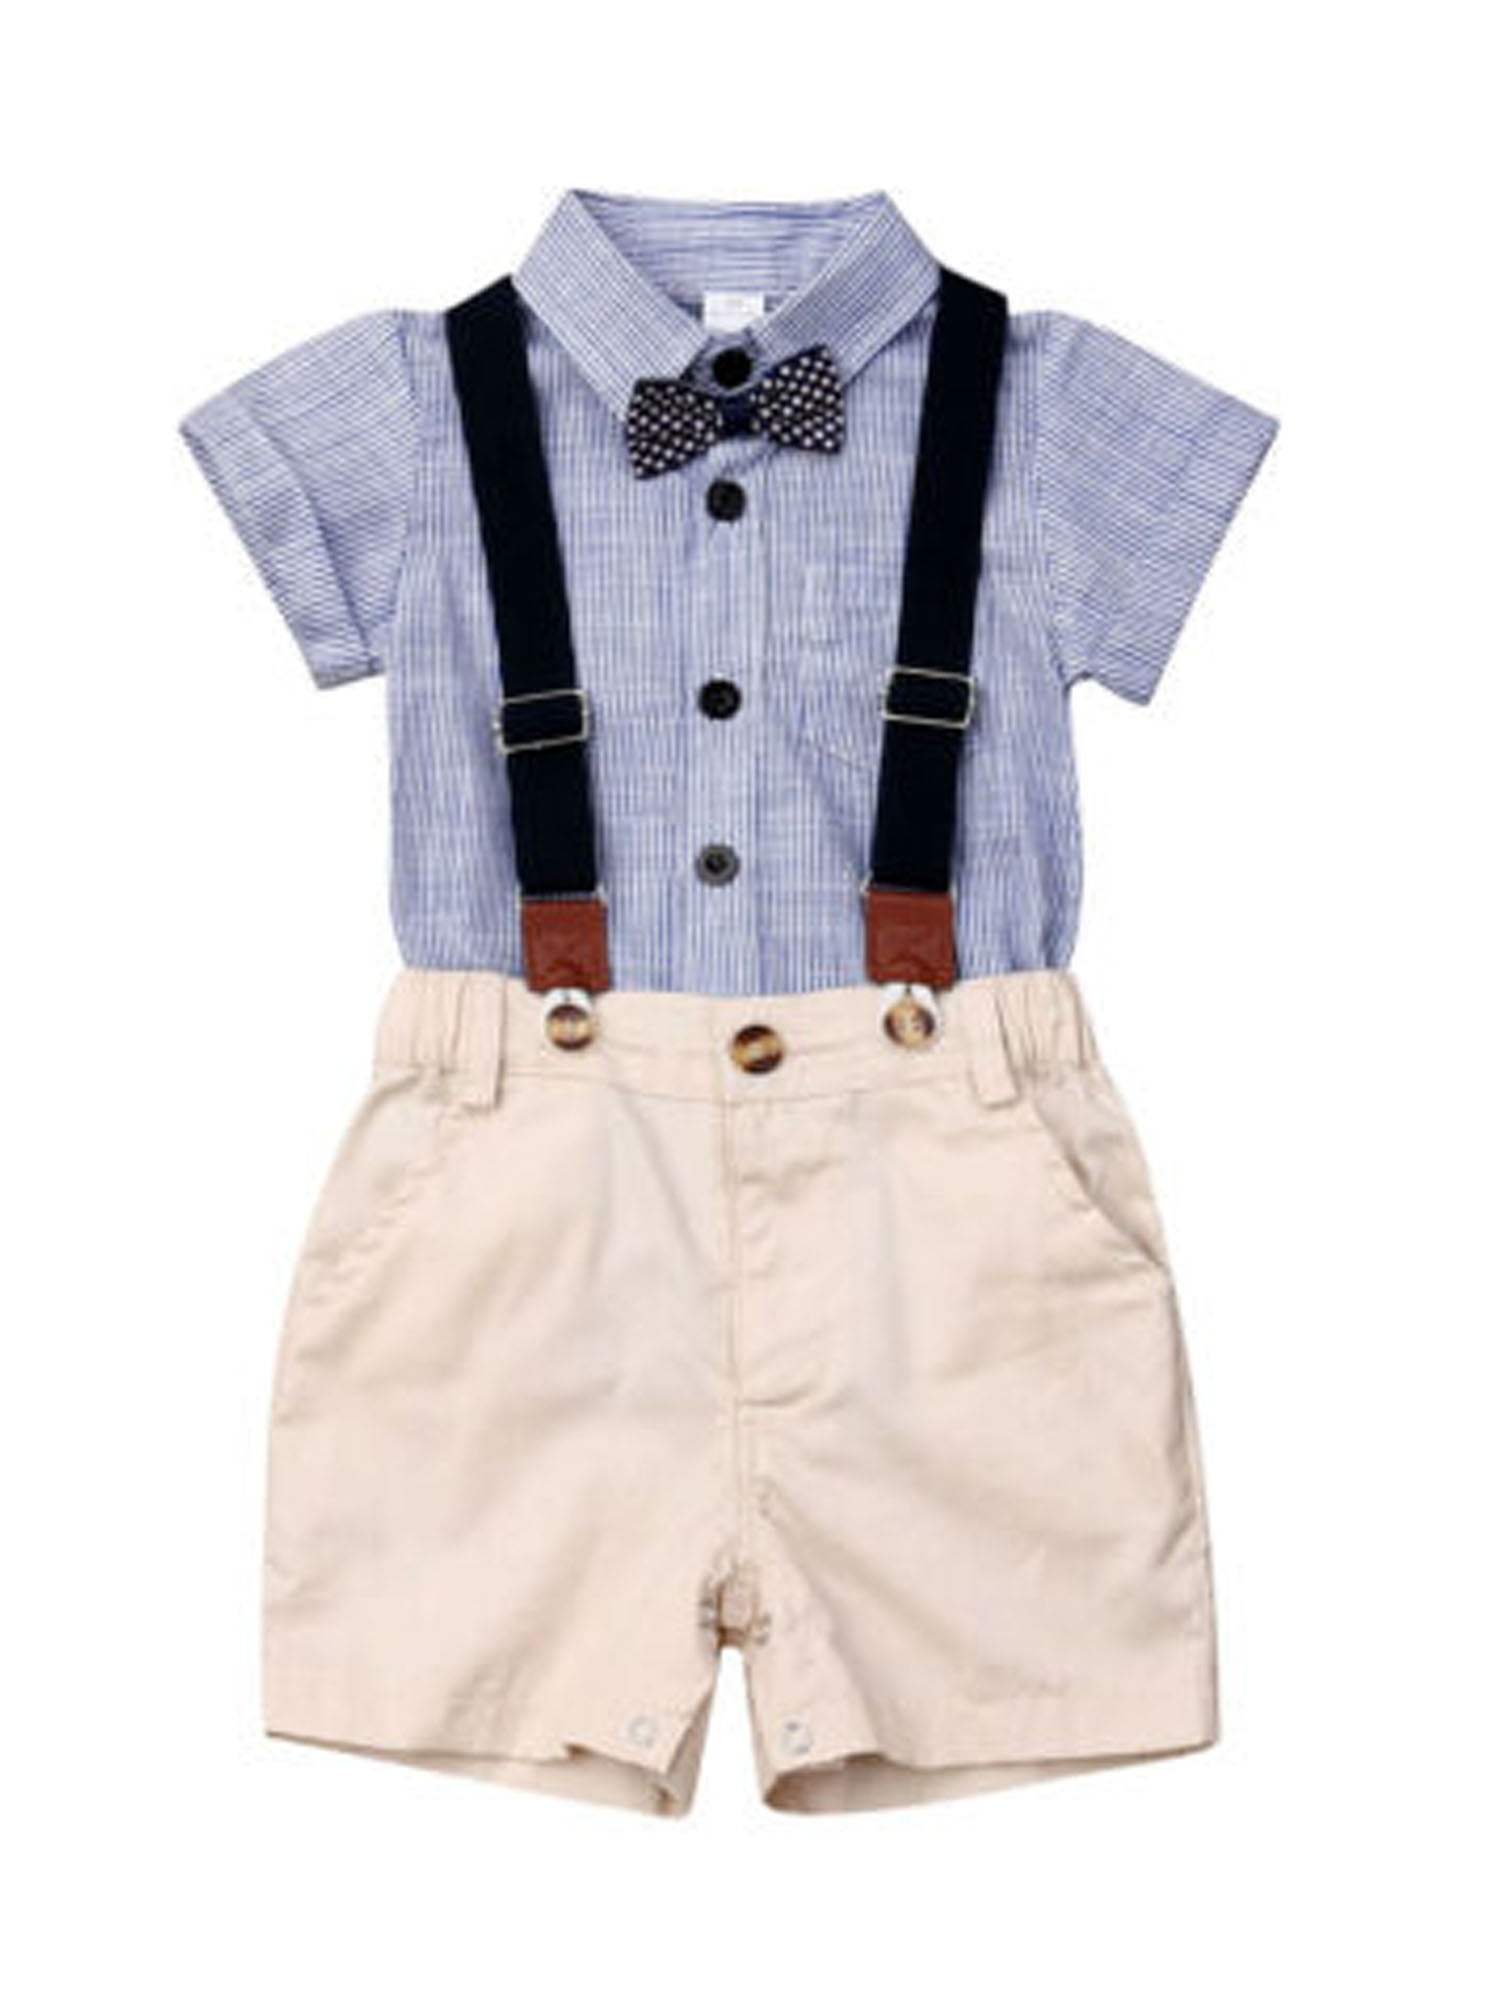 Baby Boys Gentleman 2Pcs Suit Outfits Clothes Set for Little Kids Toddler Bowtie Short Sleeve Shirt+Suspenders Shorts Overall 